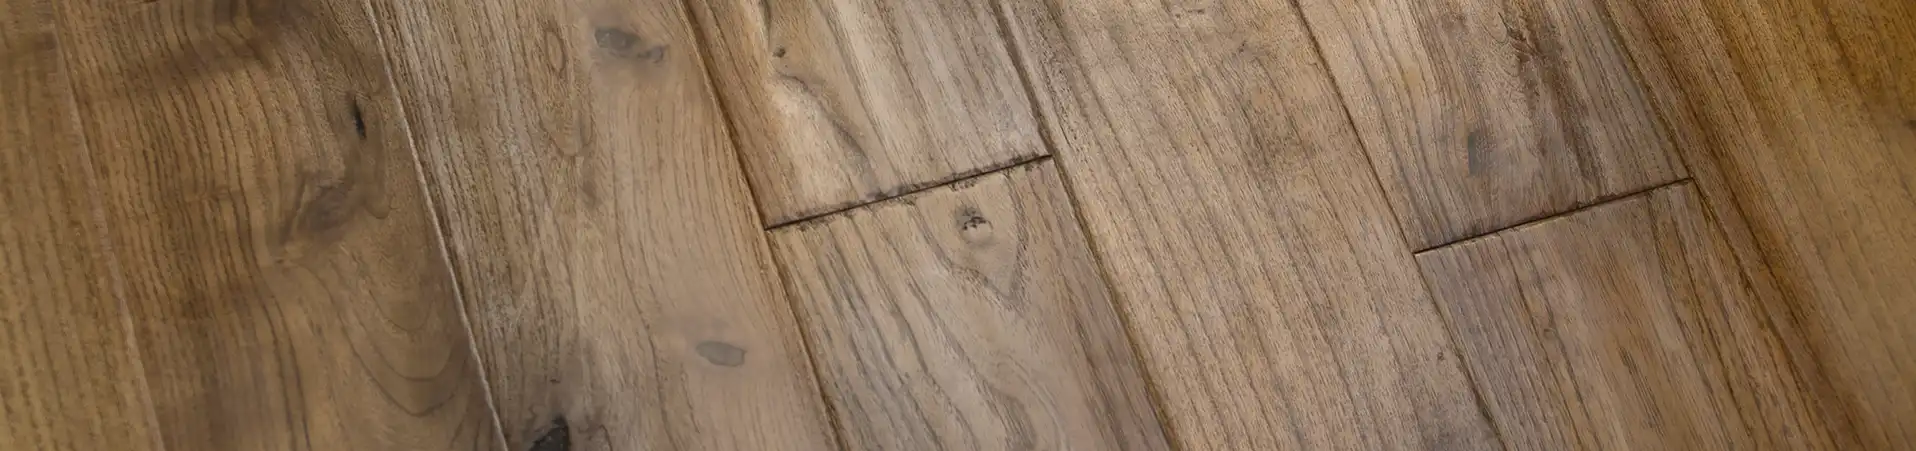 Photo of a non-sandable wood floor before refinishing